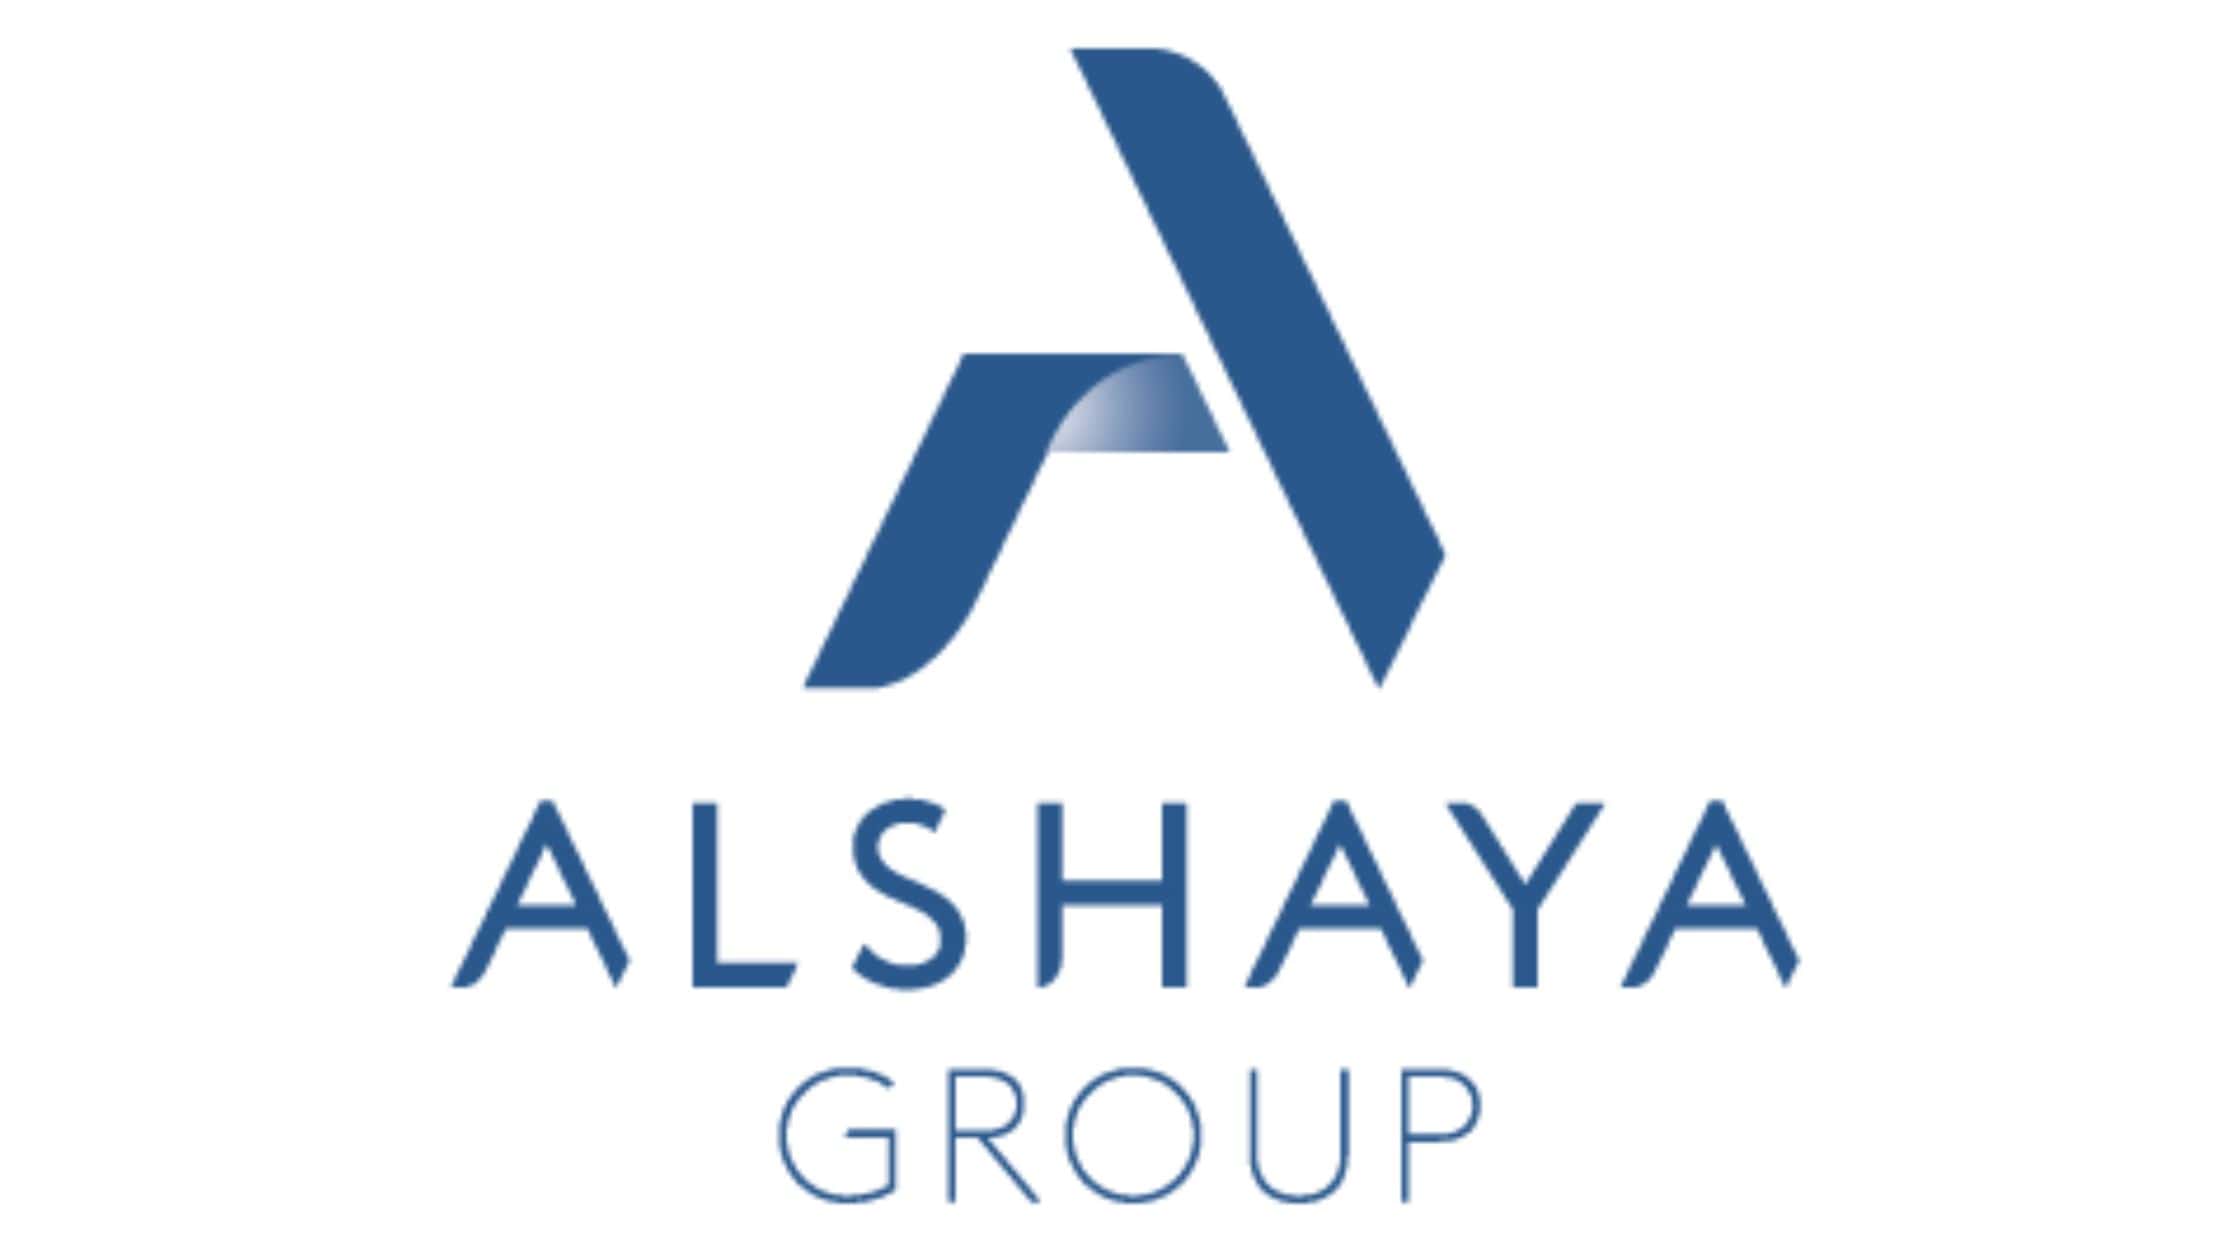 Alshaya Group has New Jobs in the UAE